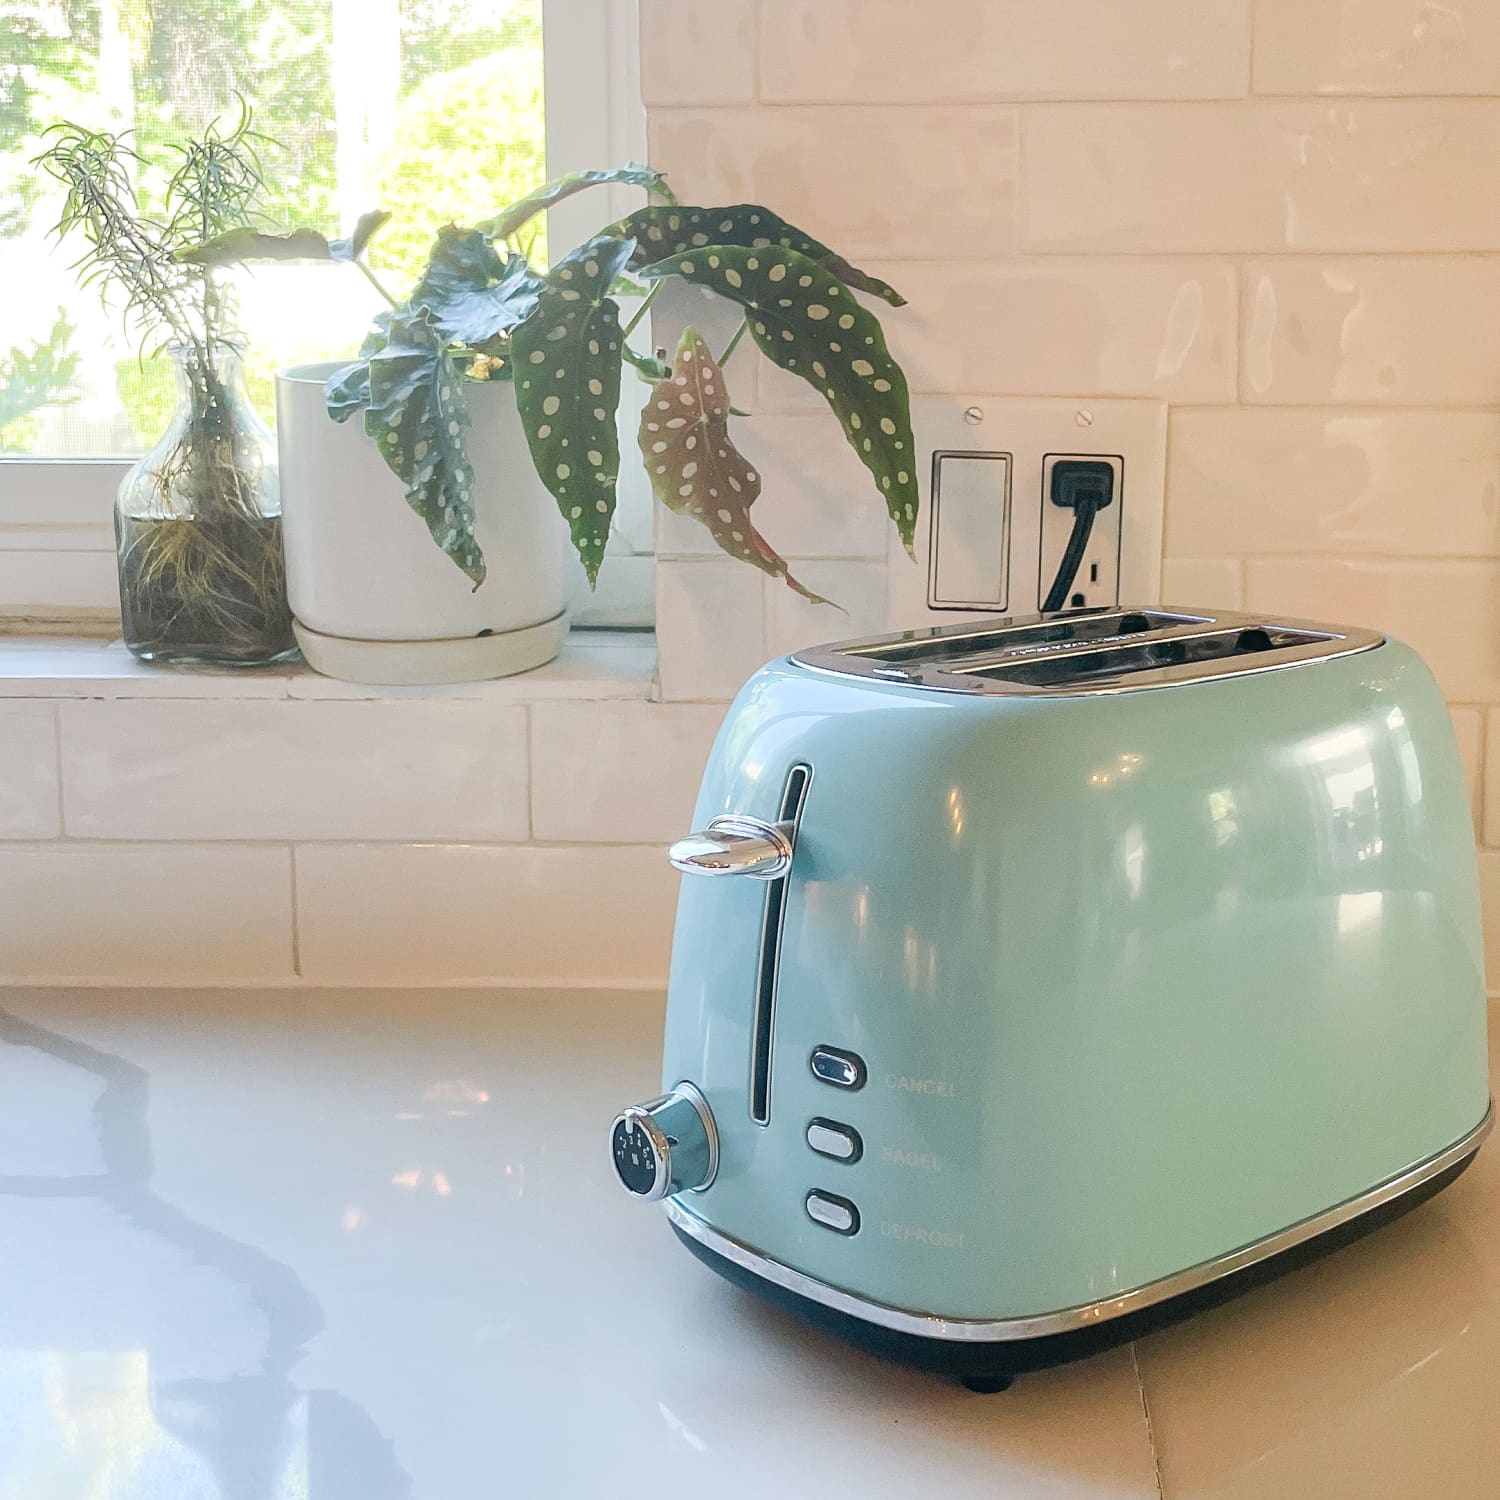 Galanz Retro 2-Slice Toaster and Electric Kettle – RJP Unlimited